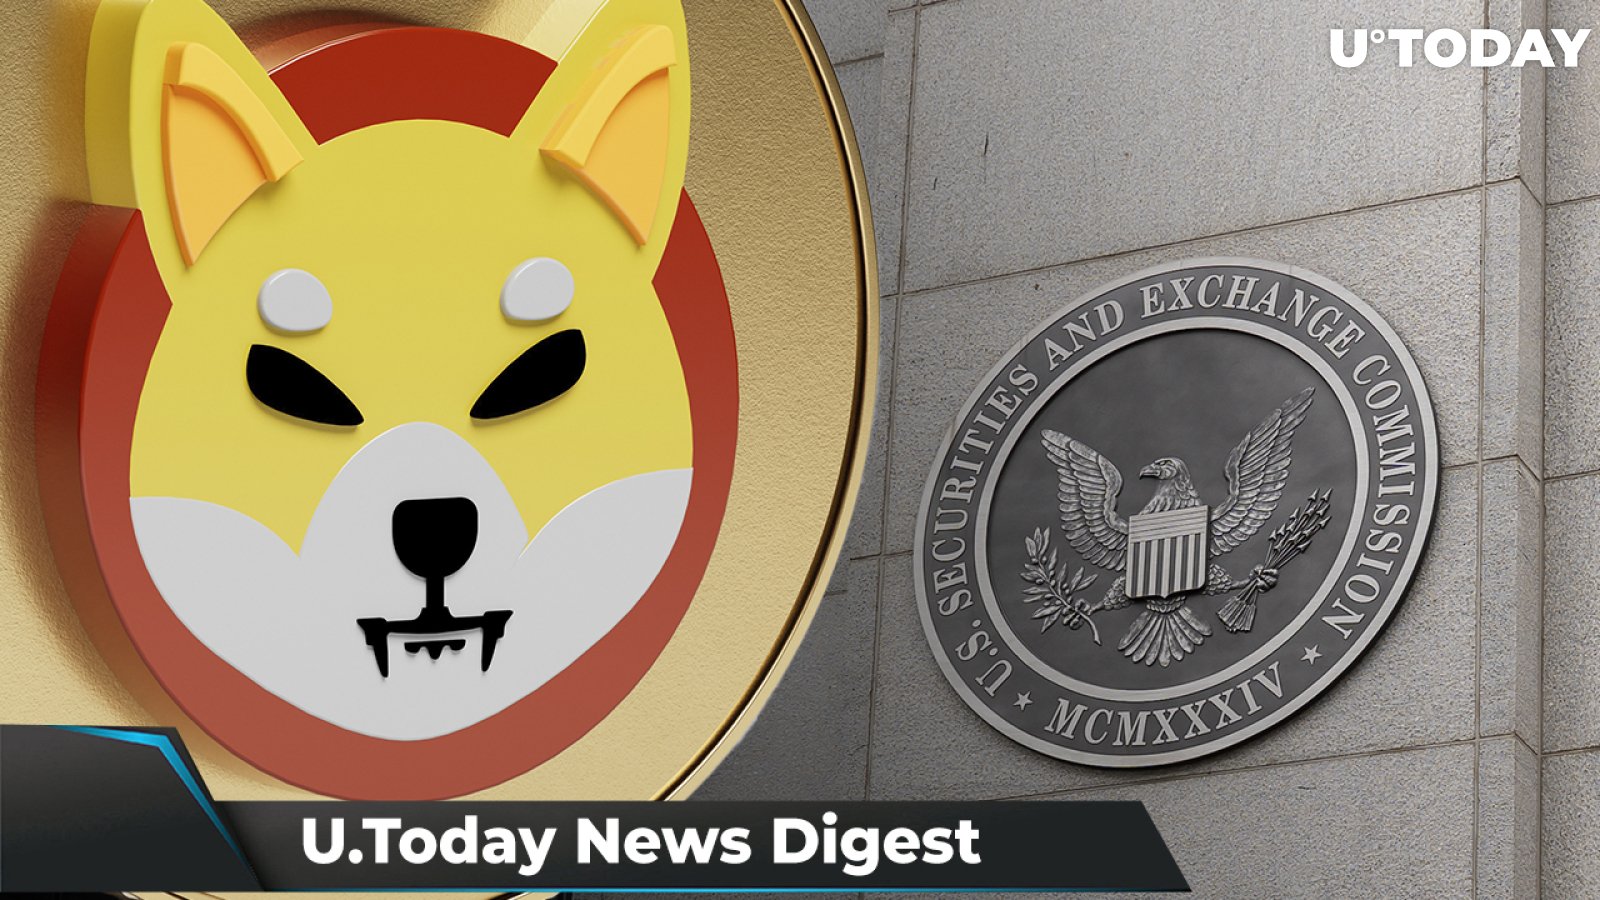 SEC Declares Its Internal Docs “Irrelevant,” SHIB-Accepting AMC Buys Gold Mine, 42 Million UST Grabbed by Whales: Crypto News Digest by U.Today